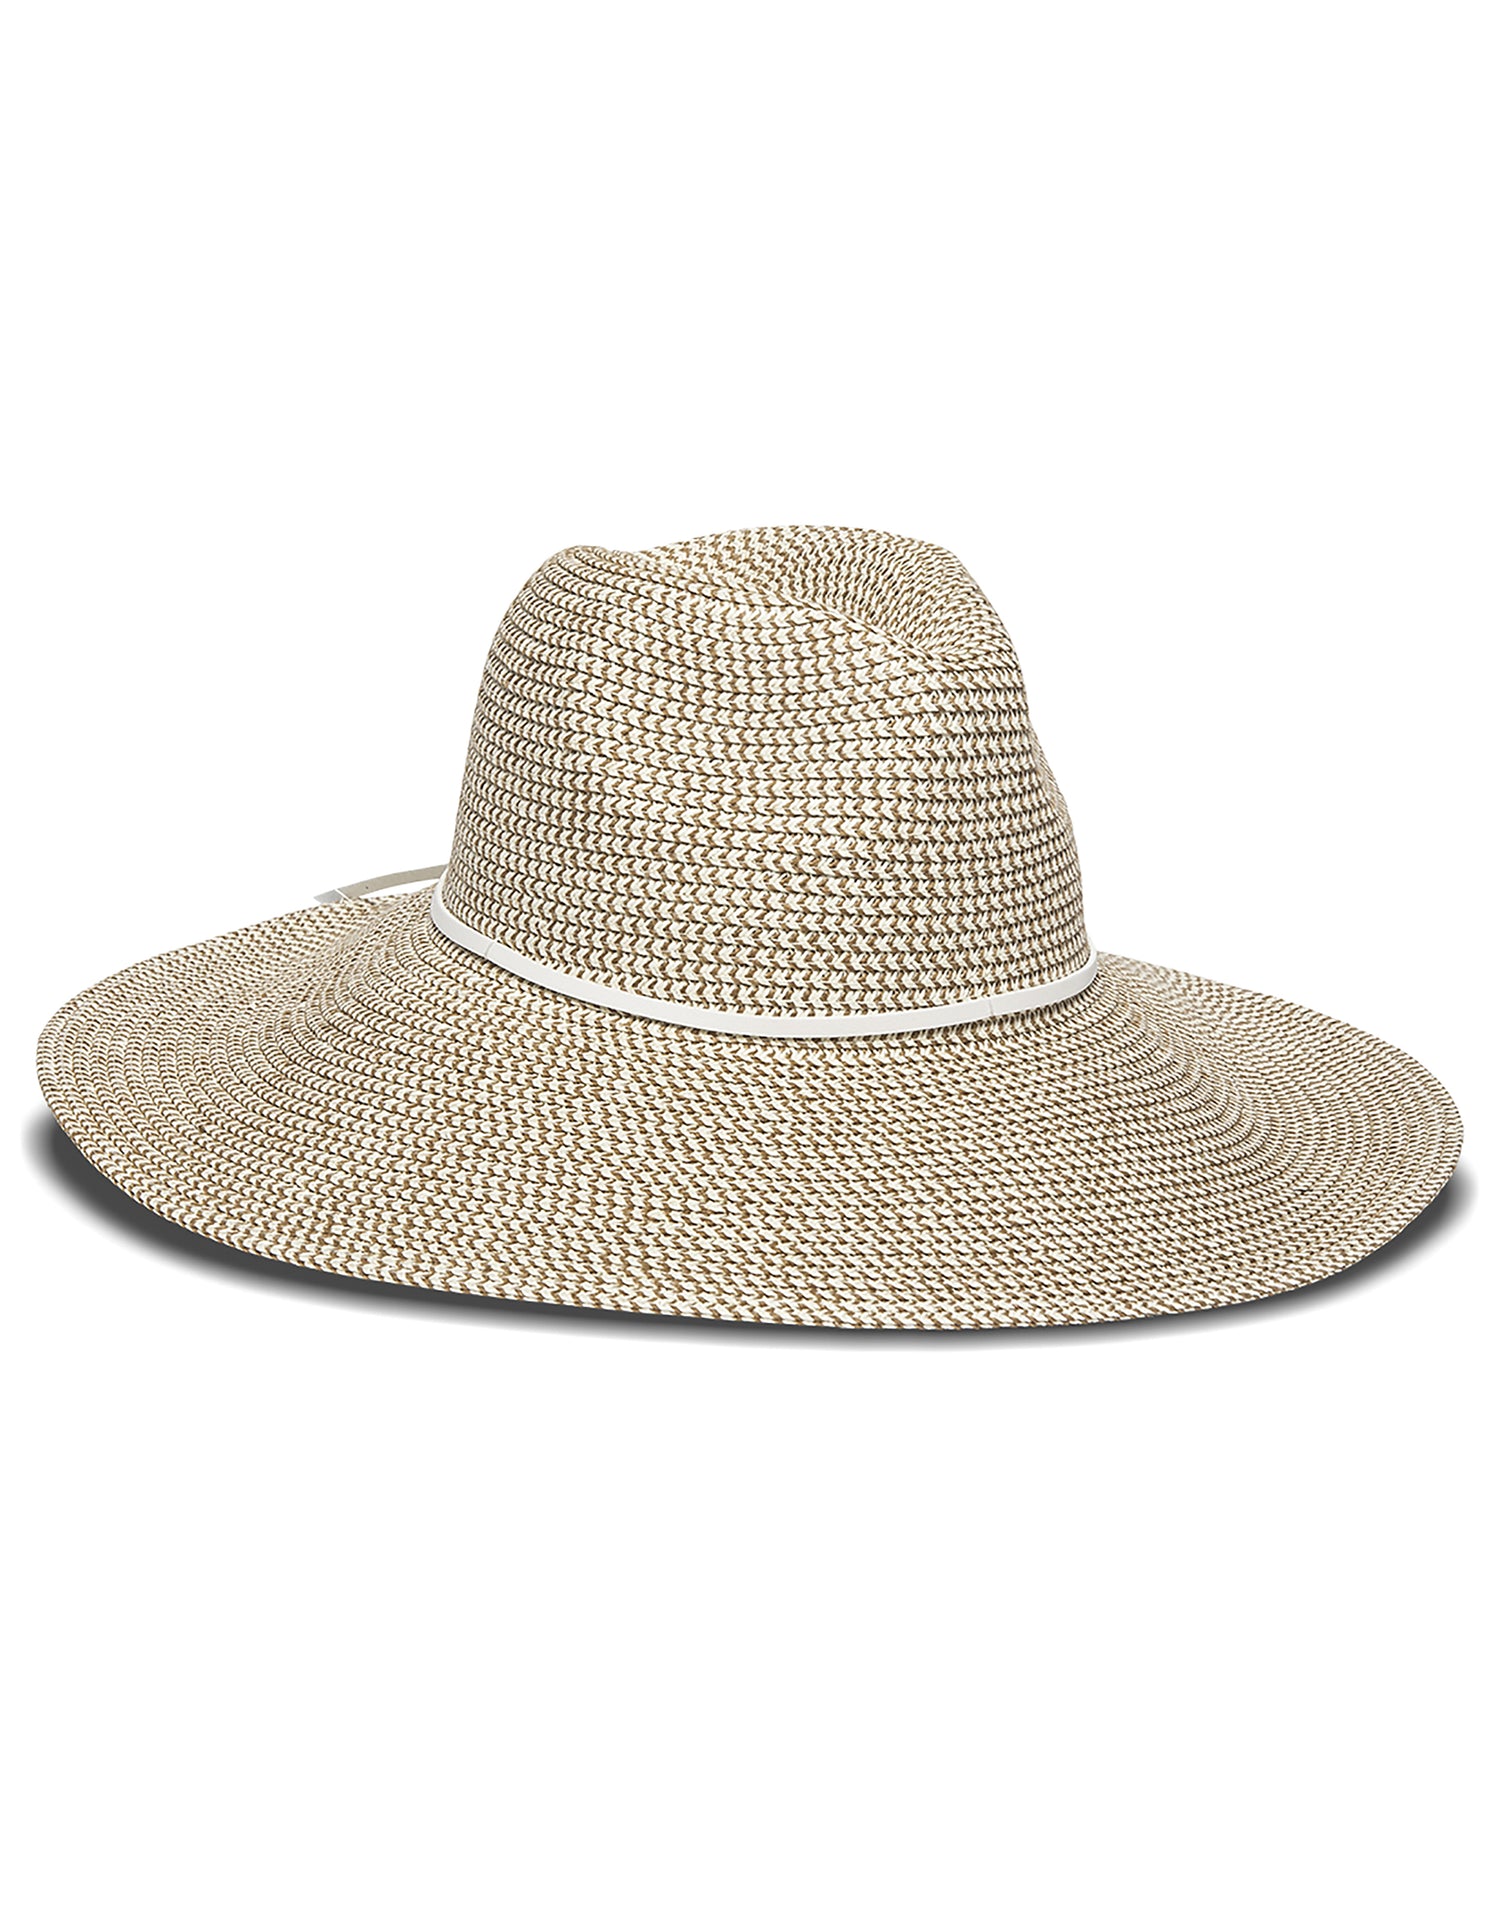 Nikki Beach's Harper Fedora in White Tweed with Leather Trim - product view